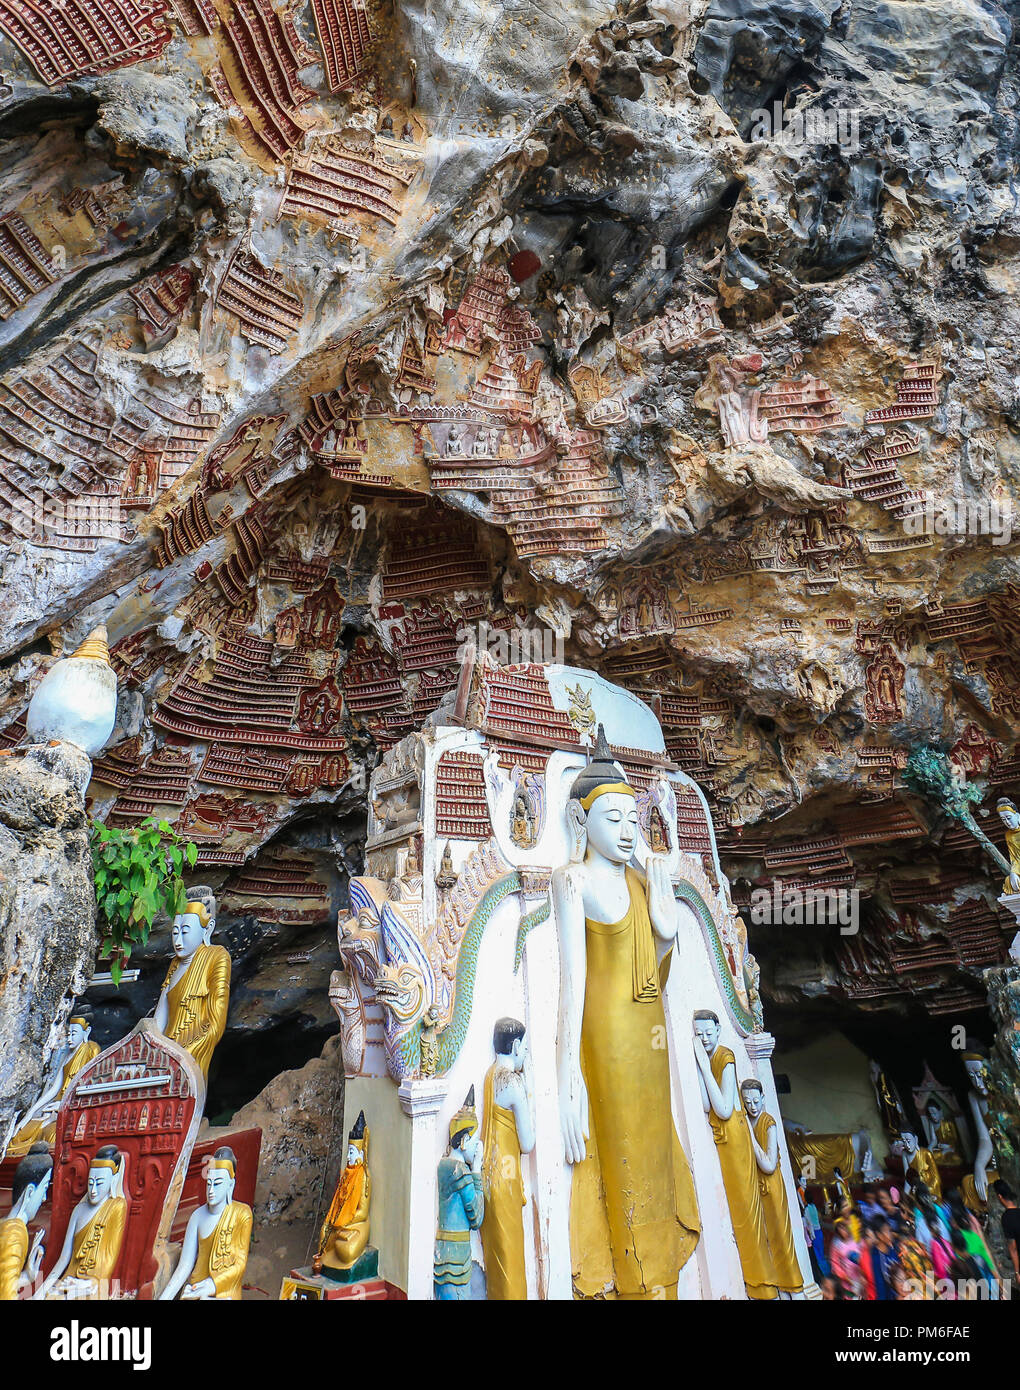 Religious carvings on limestone rock in sacred Kaw Goon cave near Hpa-An in Myanmar (Burma) Stock Photo